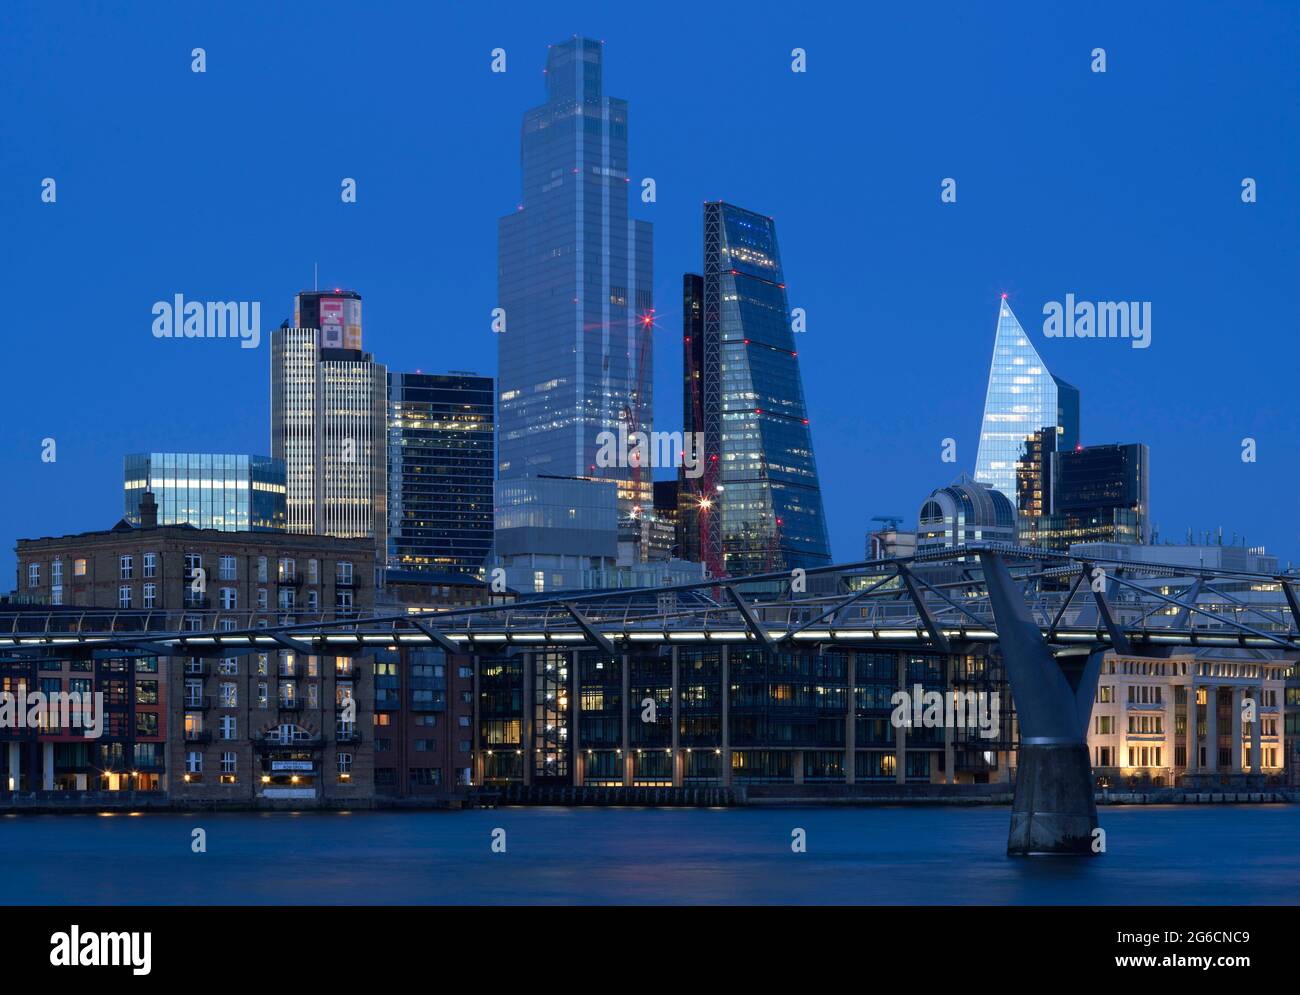 View from Bankside. 22 Bishopsgate, LONDON, United Kingdom. Architect: PLP Architecture, 2020. Stock Photo